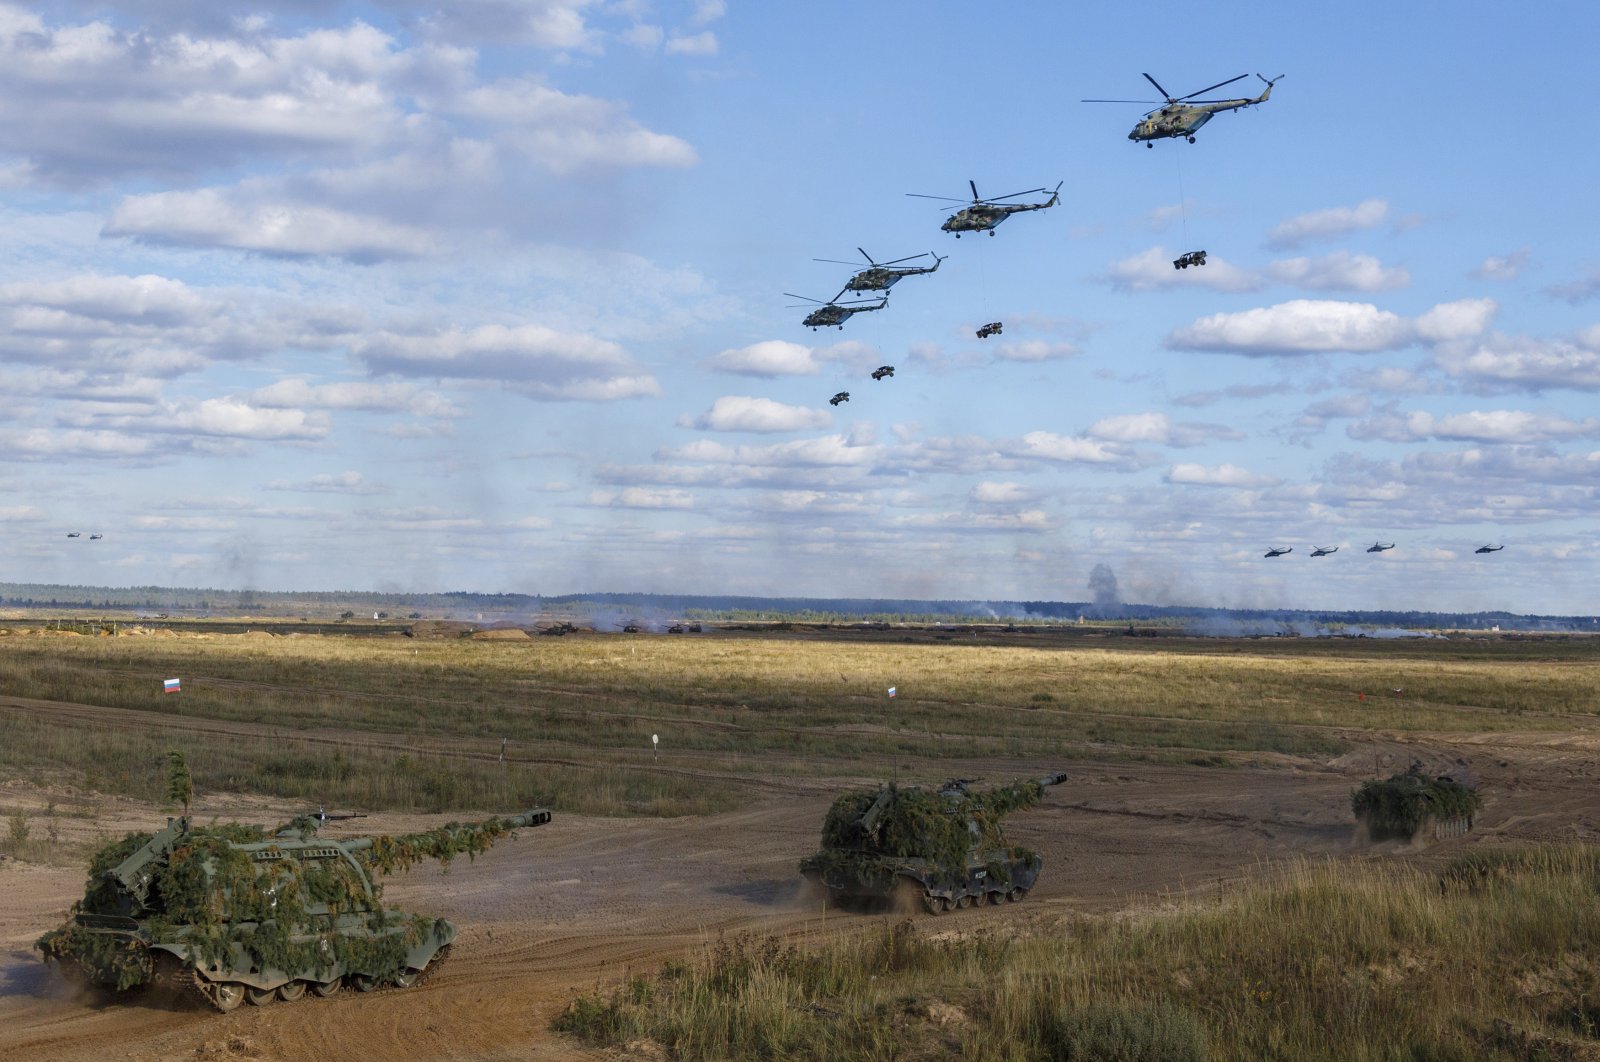 In this photo released by the Russian Defense Ministry Press Service, a view of the joint strategic exercise of the armed forces of the Russian Federation and the Republic of Belarus at the Mulino training ground in the Nizhny Novgorod region, Russia, on Sept. 11, 2021. (AP Photo)